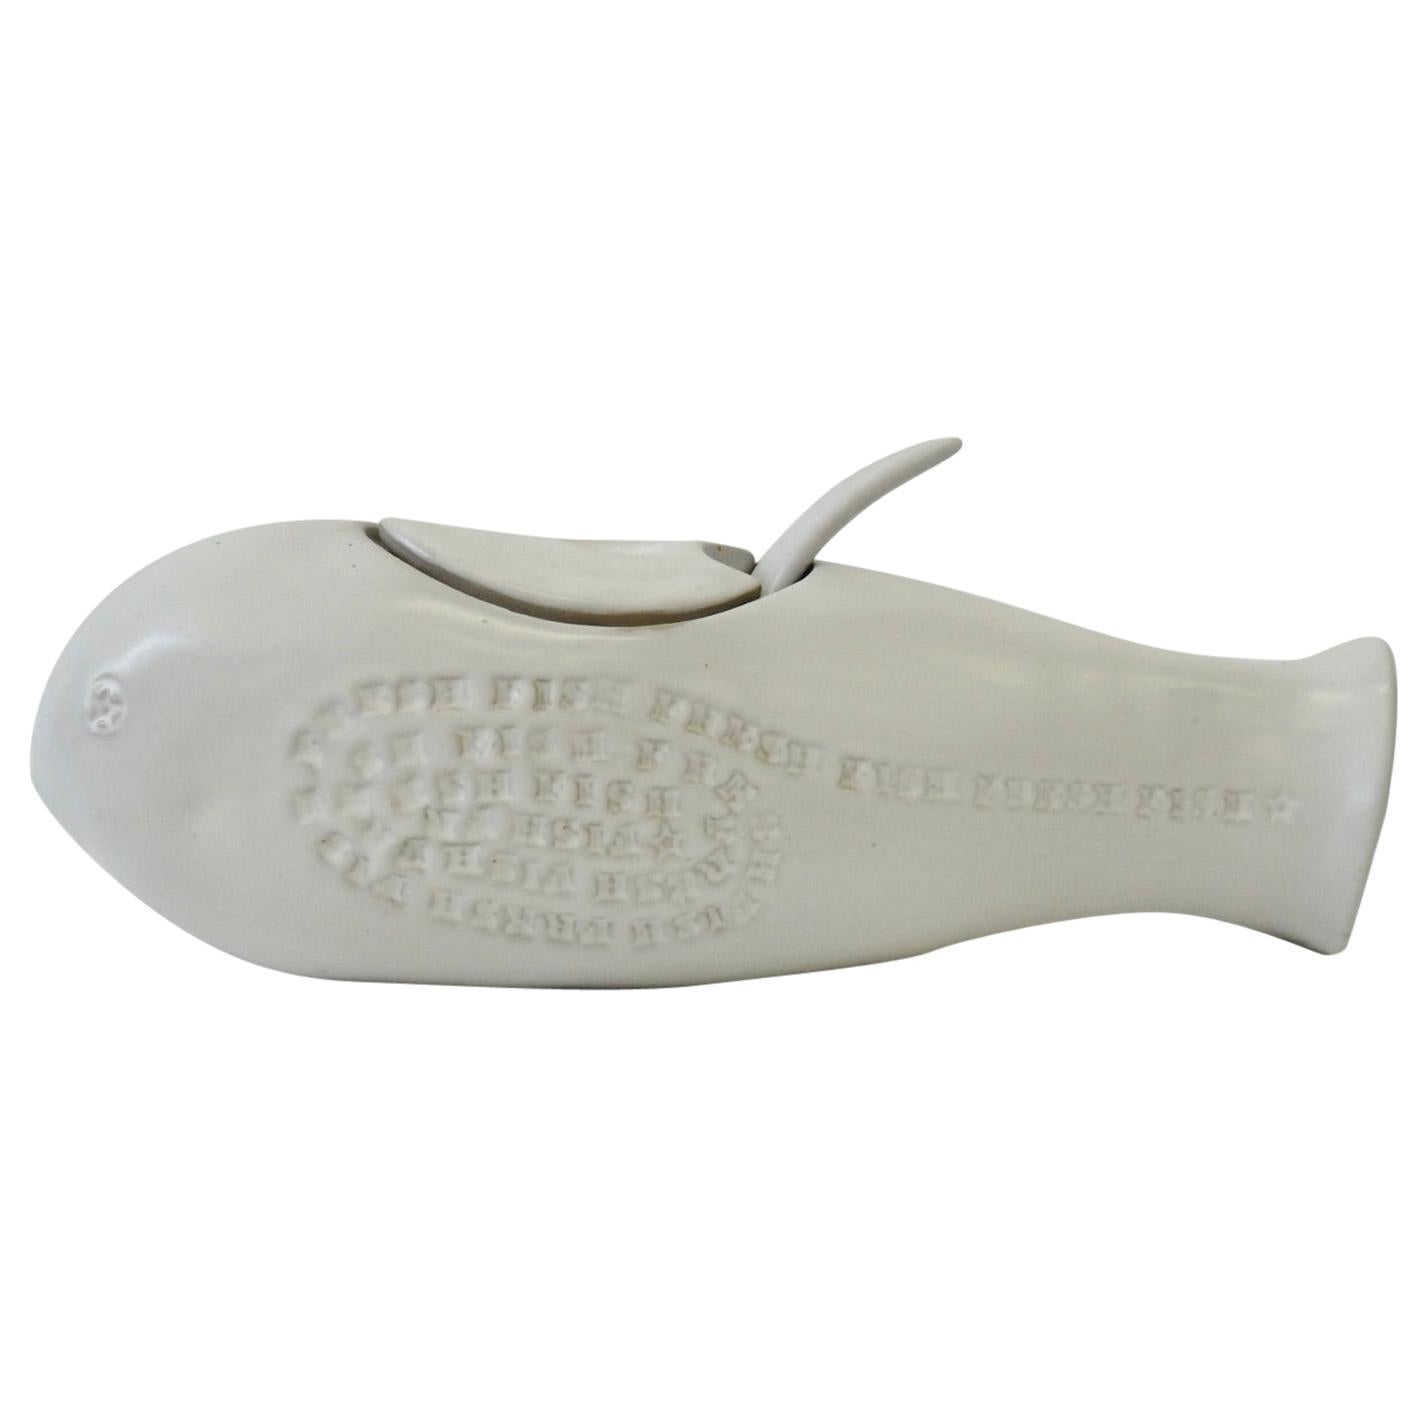 Bennington Pottery Fish Shaped Serving Tureen with Ladle in Matte White Glaze